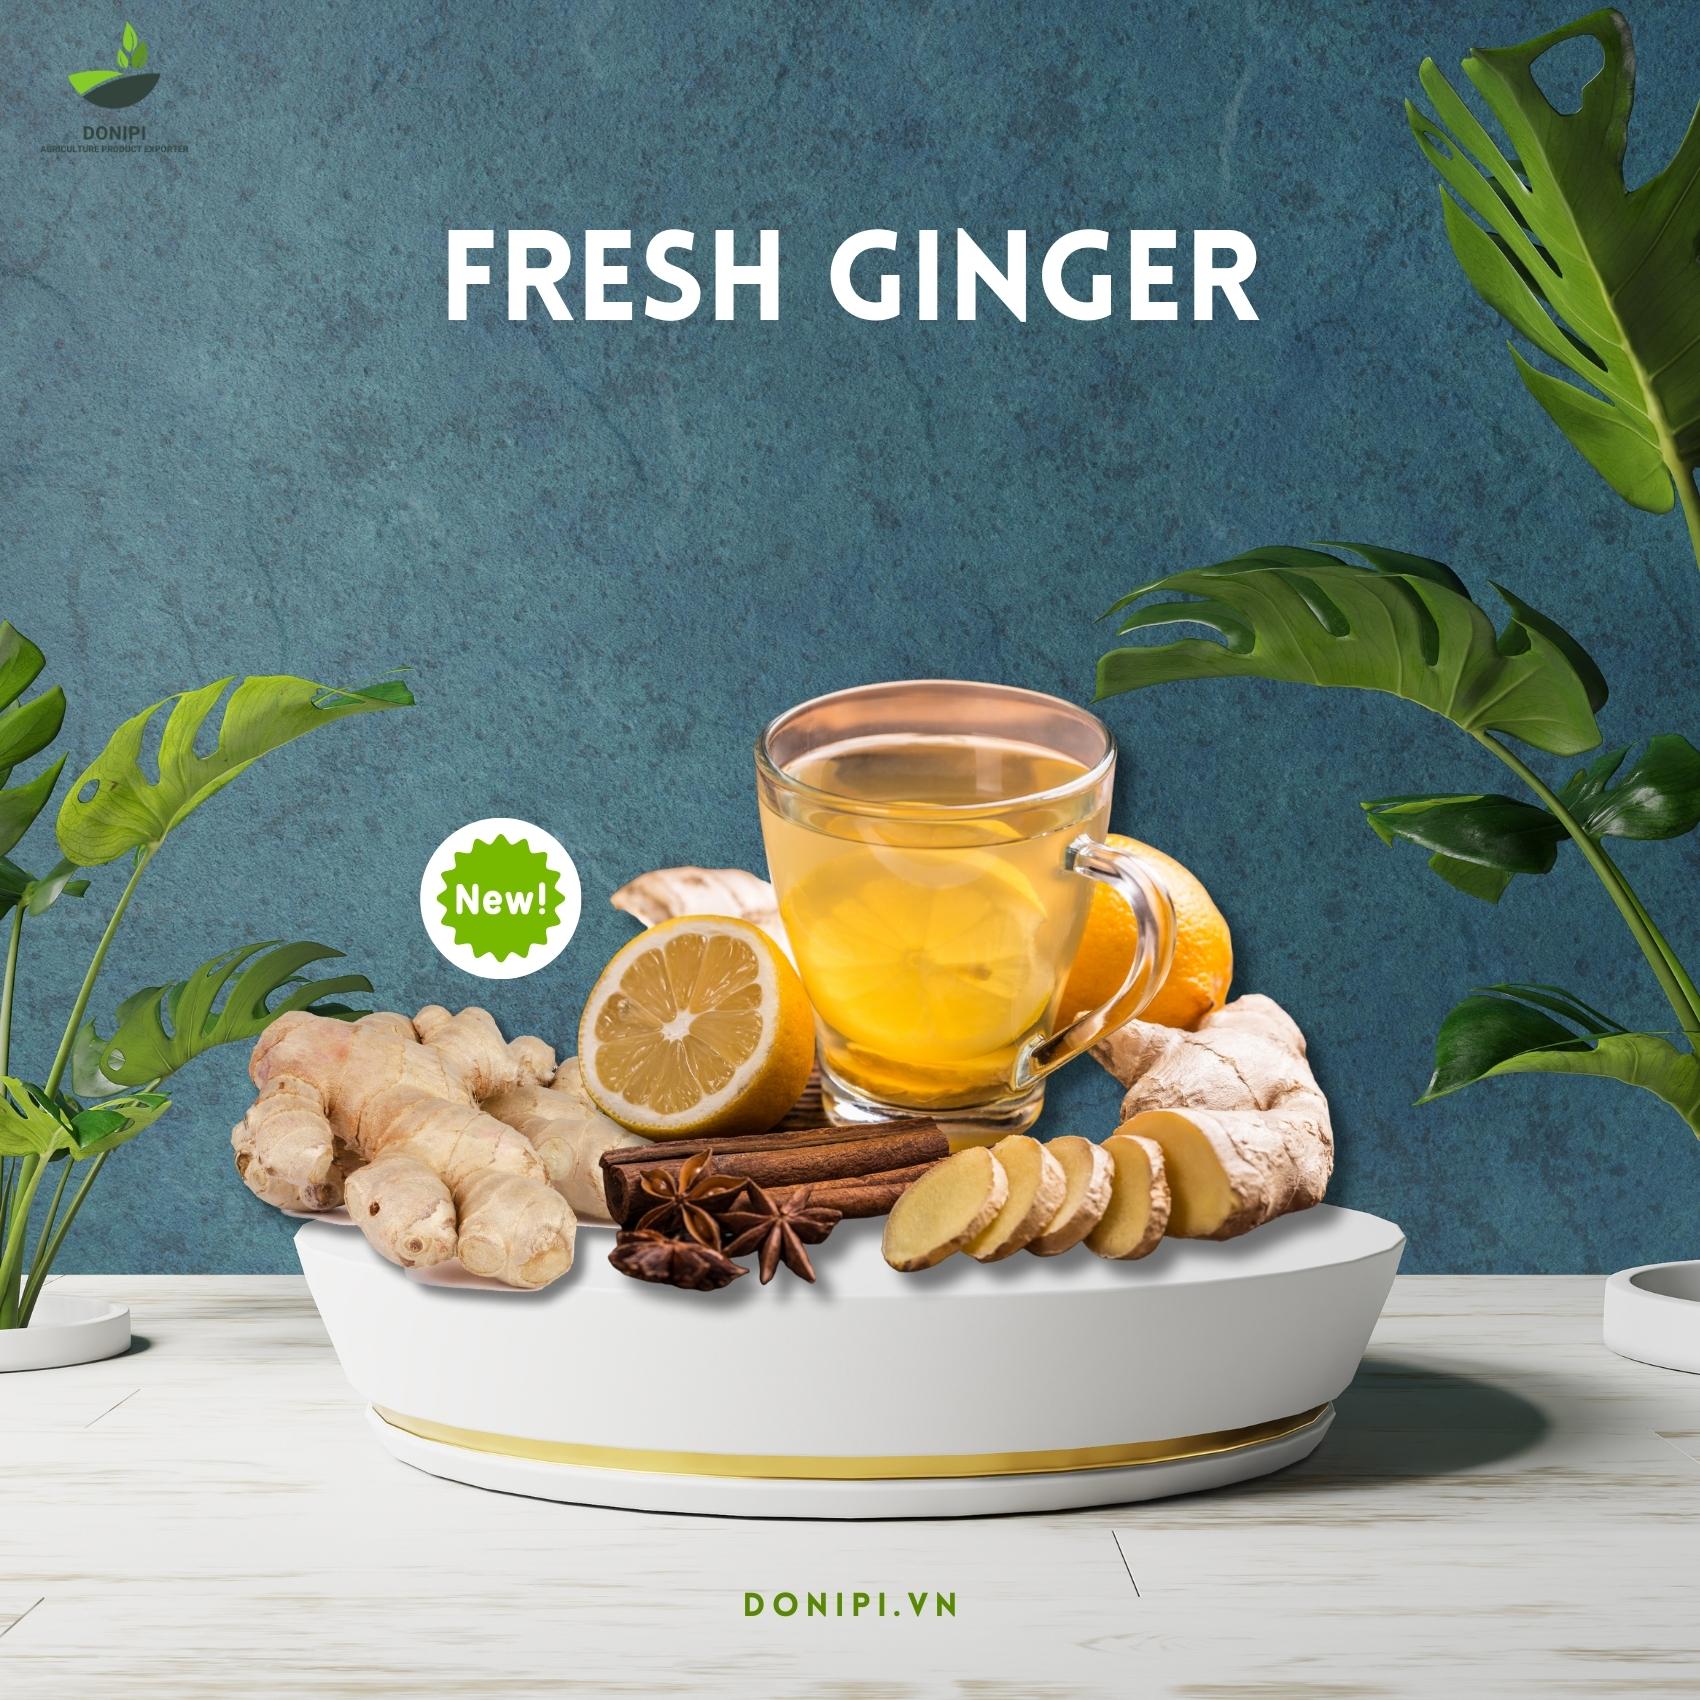 How to Store Fresh Ginger Tips for Long-lasting Flavor and Freshness